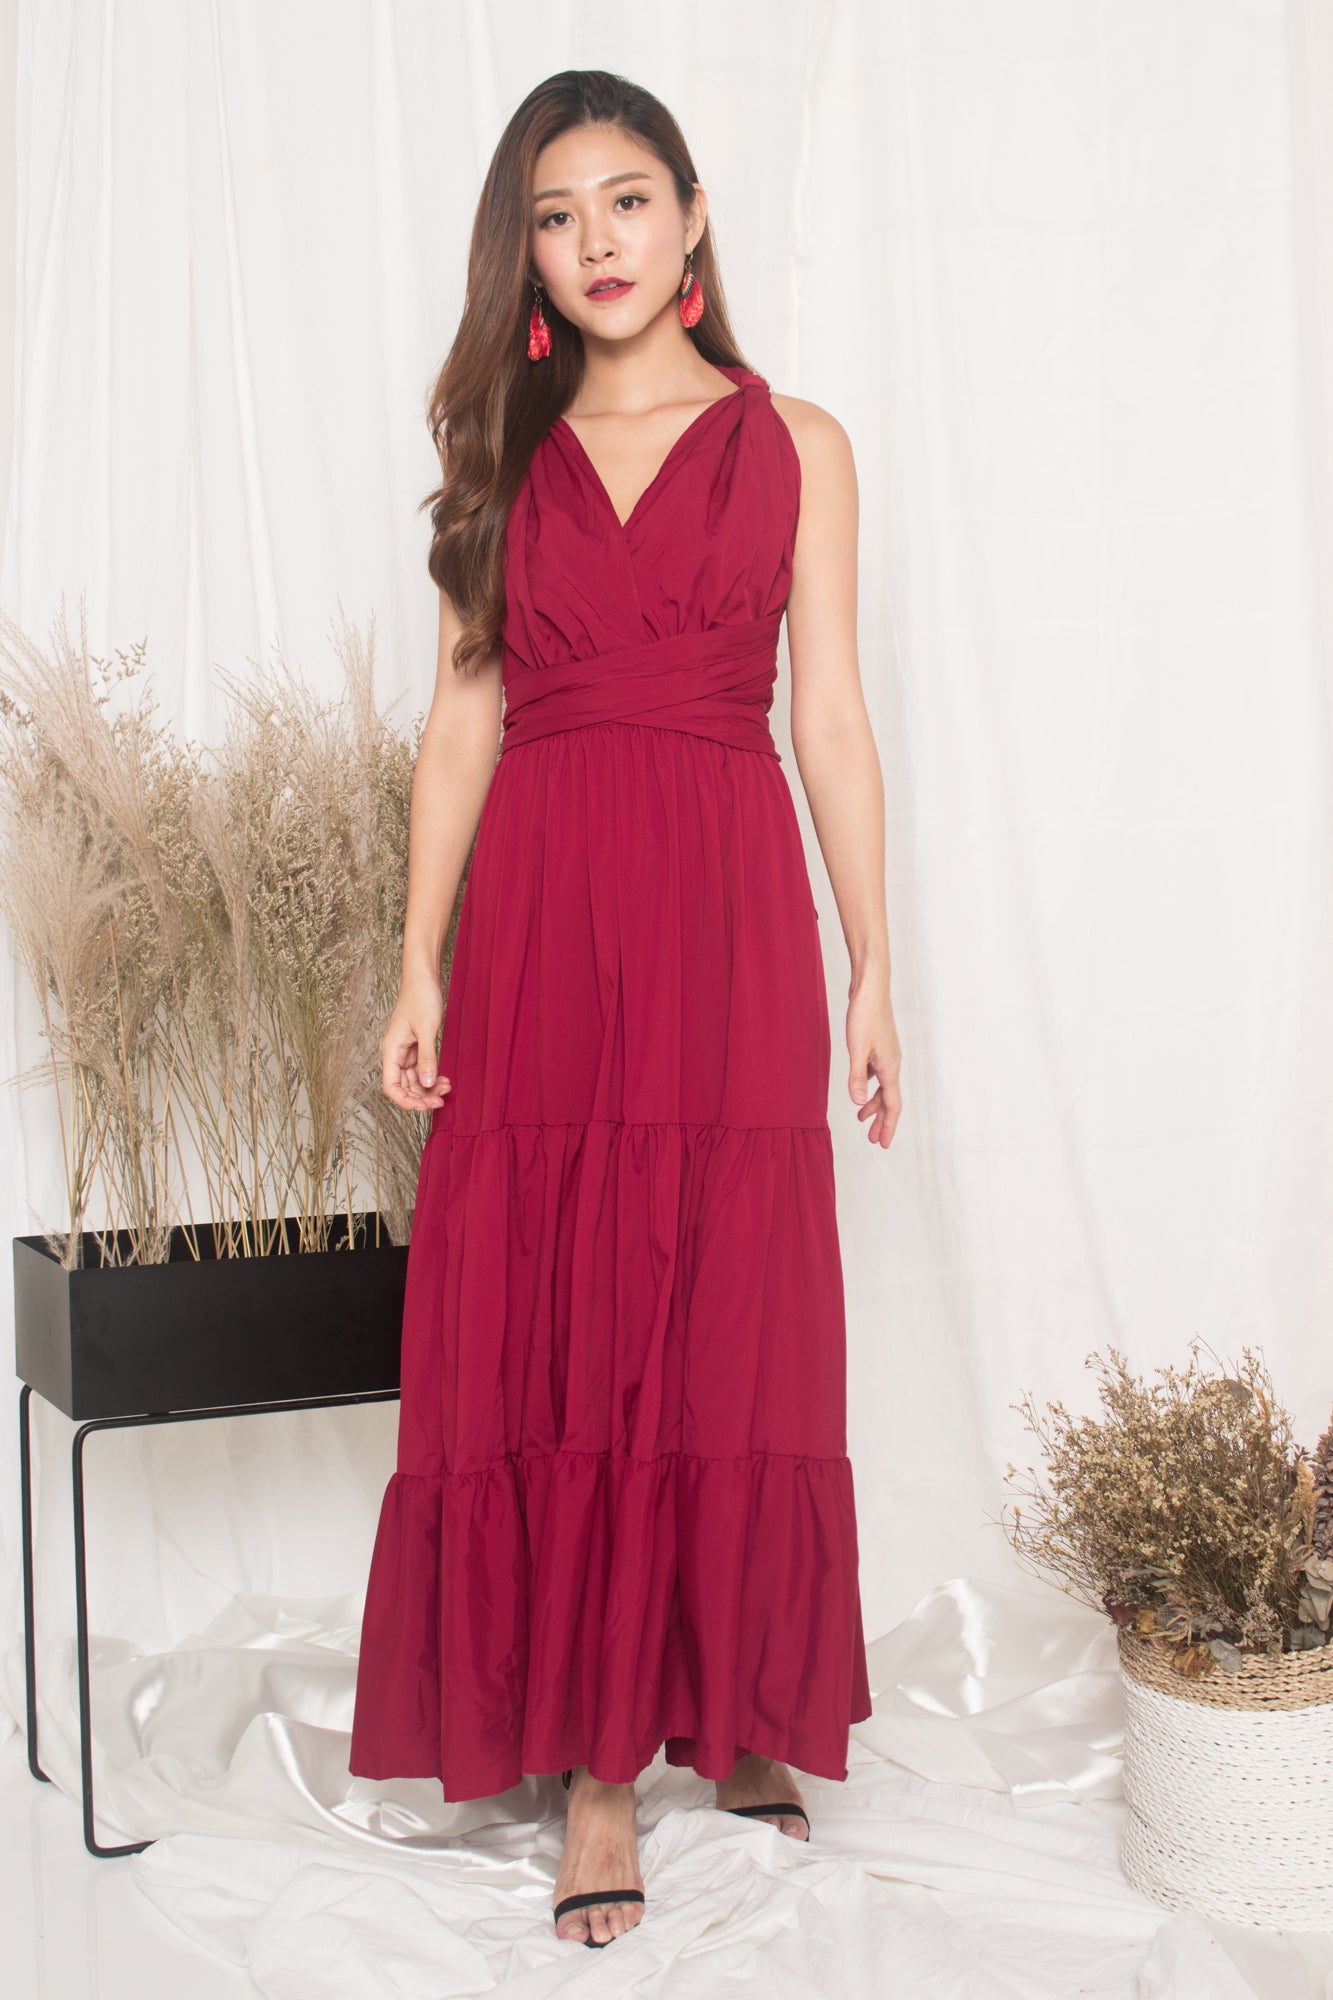 LUXE - PARIS LOVER DO IT YOURSELF MAXI DRESS IN BURGUNDY